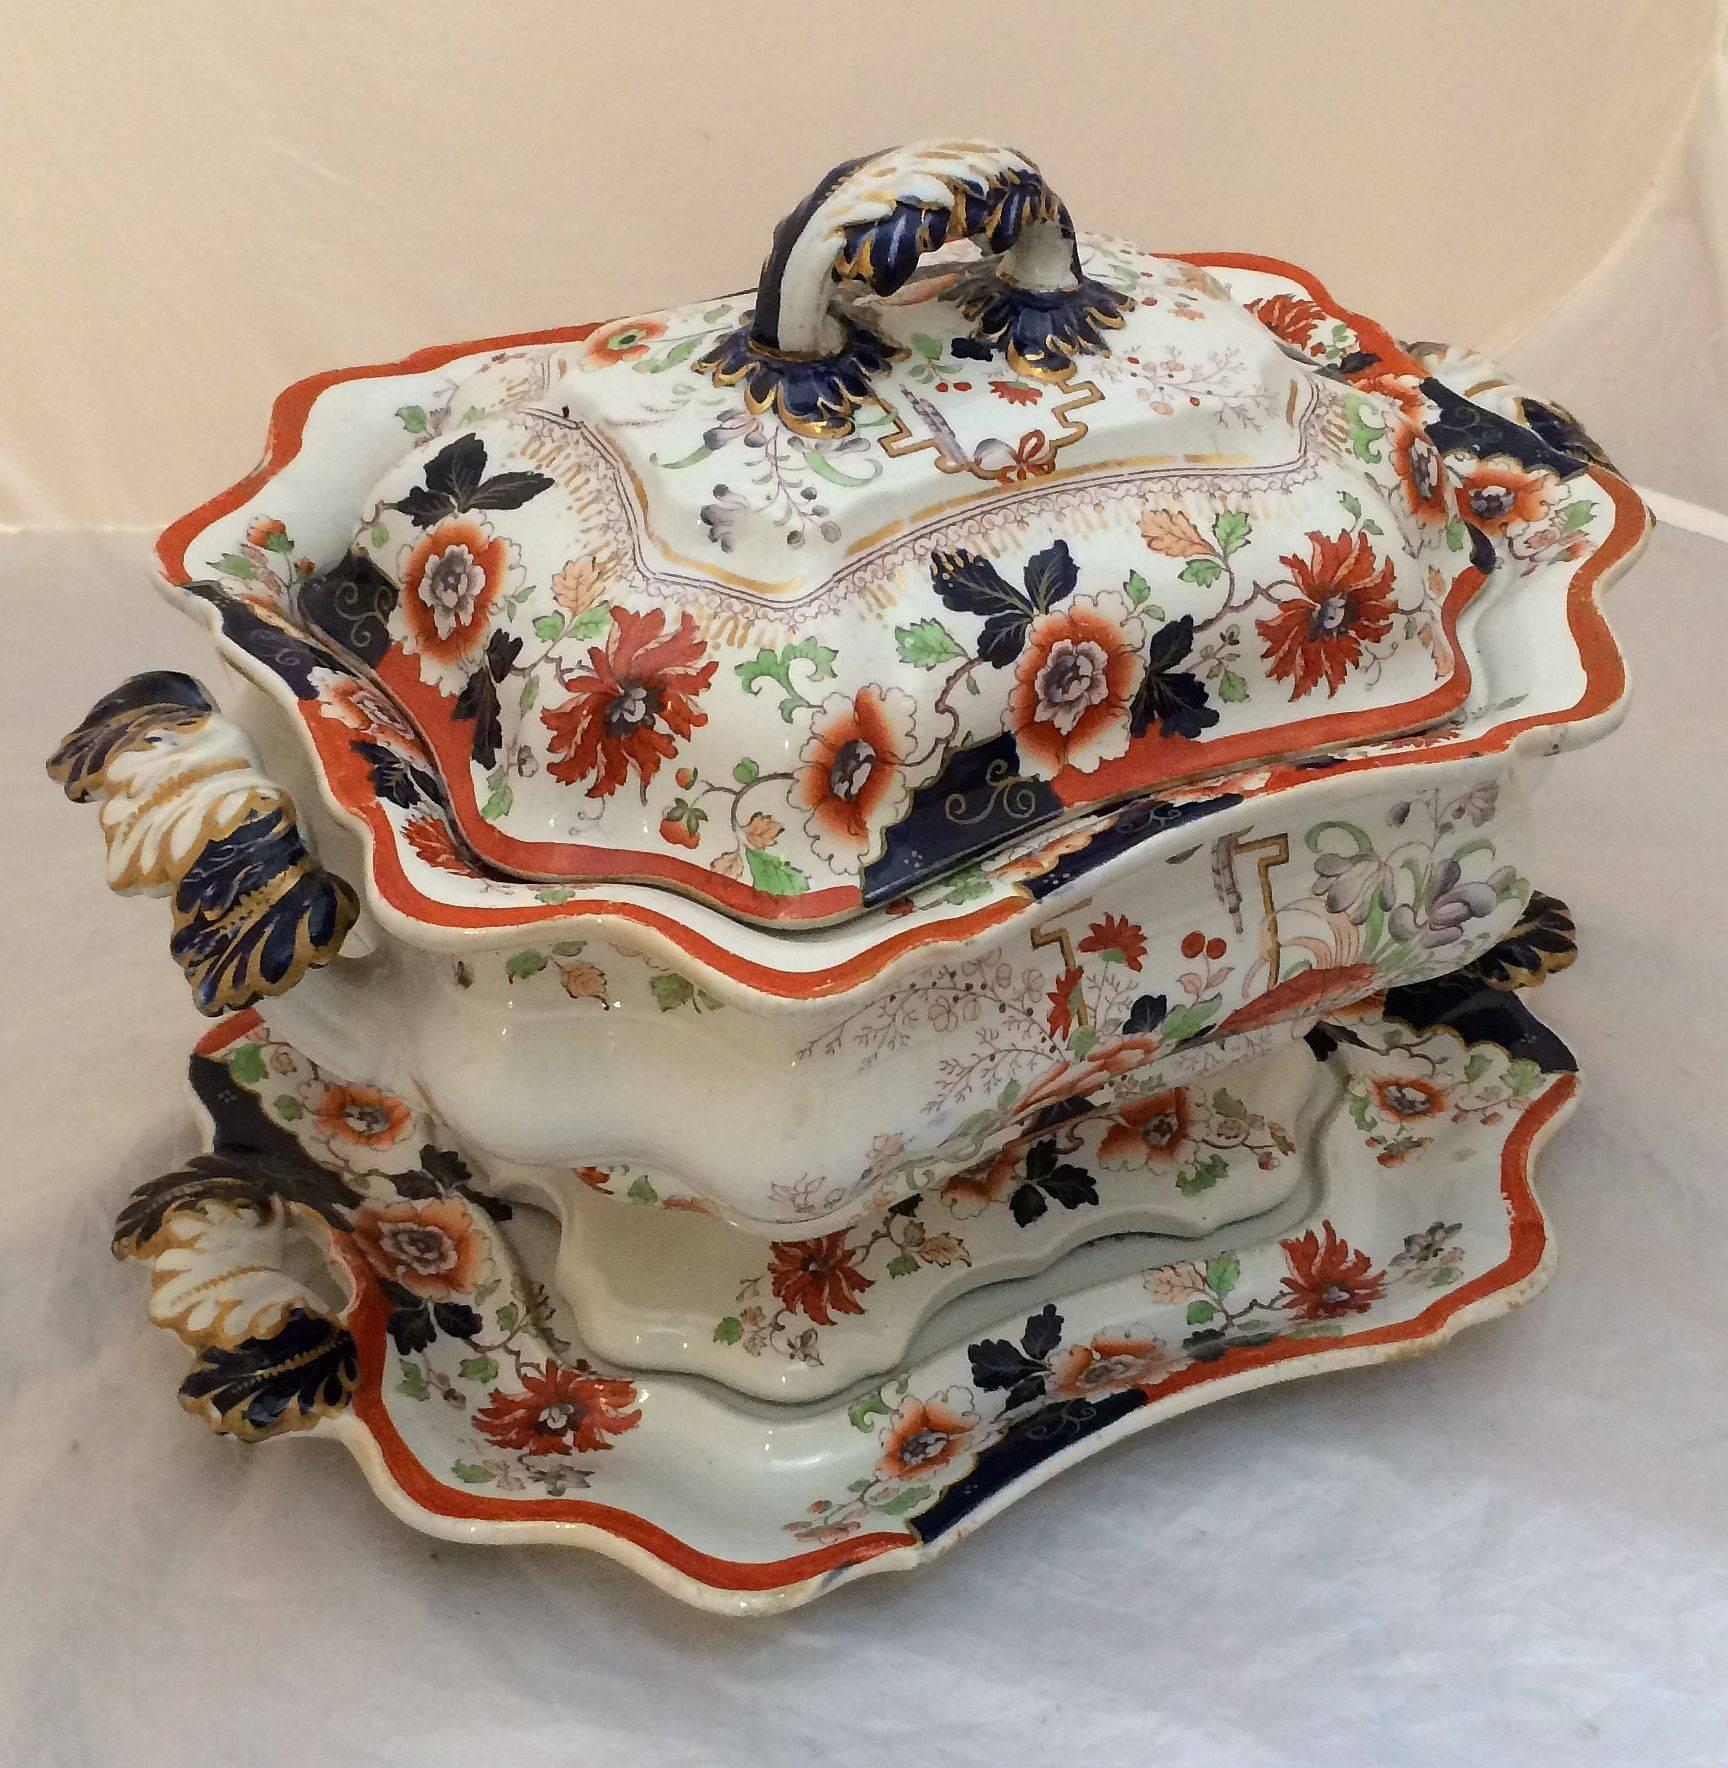 A fine English ironstone covered tureen with removable lid and under-tray from the early 19th century, featuring a lovely poly-chrome pattern and gilt and cobalt blue accents on the body and handles.

With mark: Real Iron-Stone China (and British